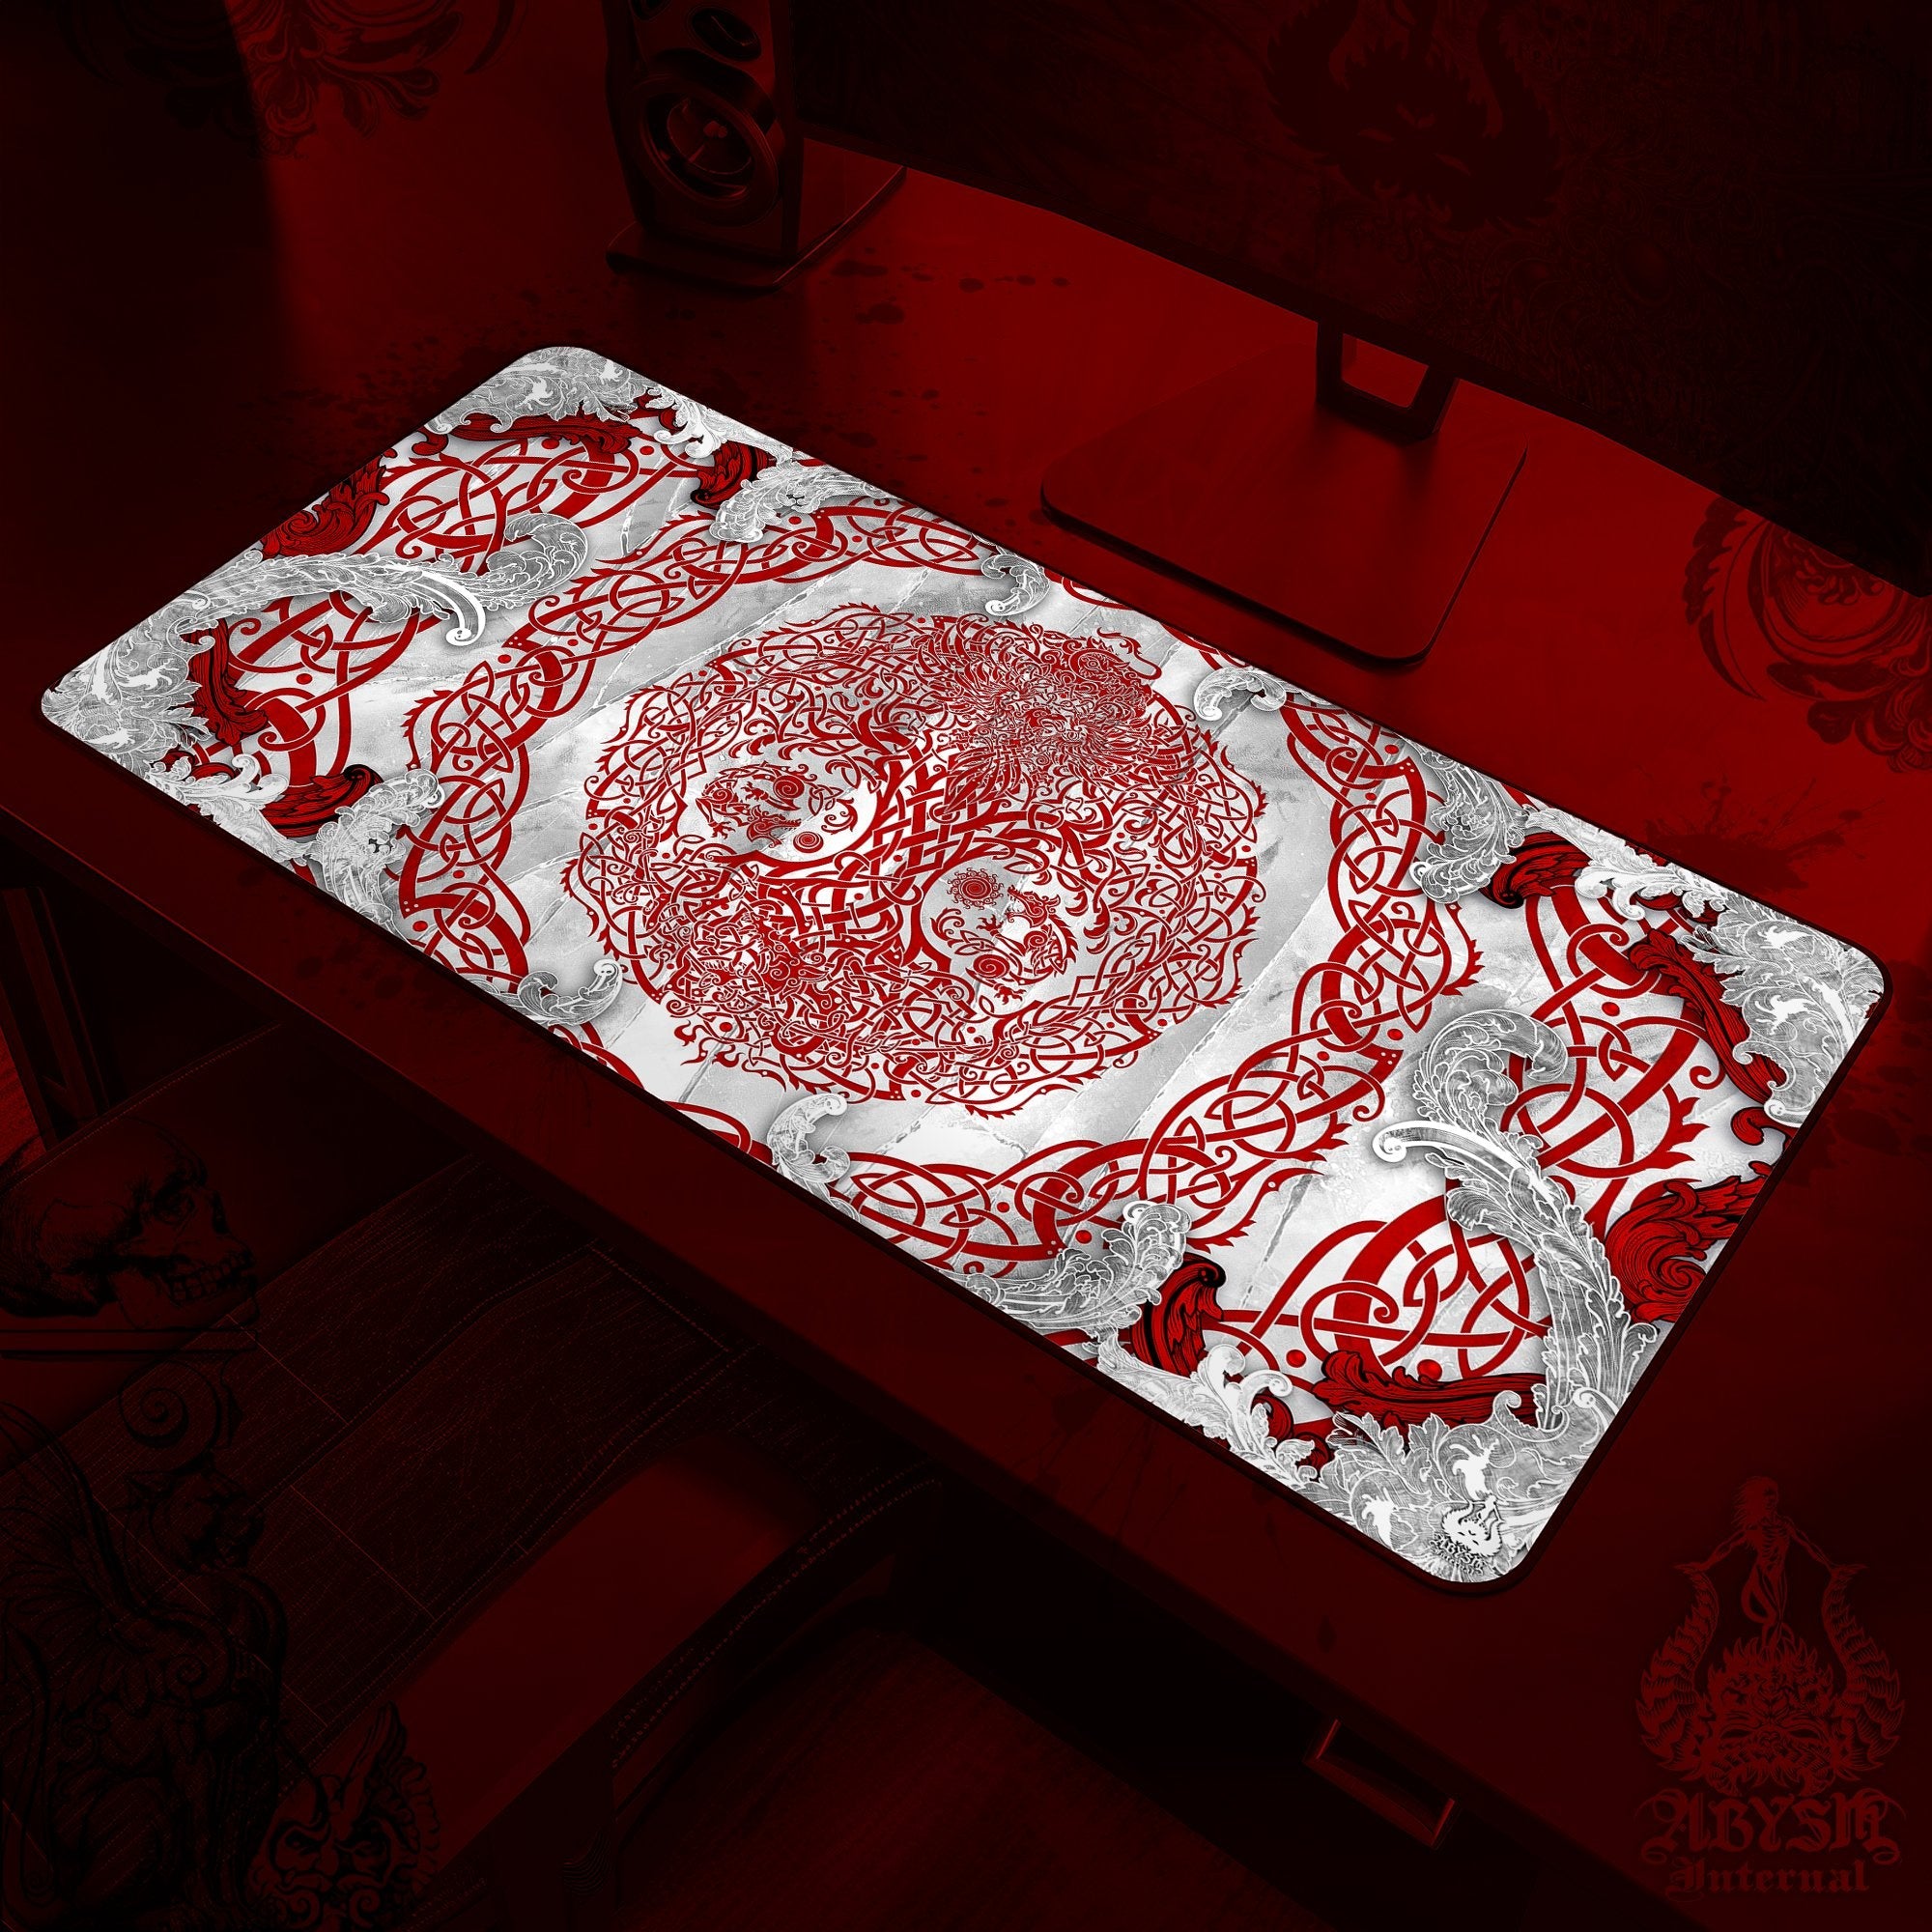 Yggdrasil Desk Mat, Nordic Tree of Life Gaming Mouse Pad, Norse Table Protector Cover, Knotwork Workpad, Viking Art Print - Bloody White Goth - Abysm Internal